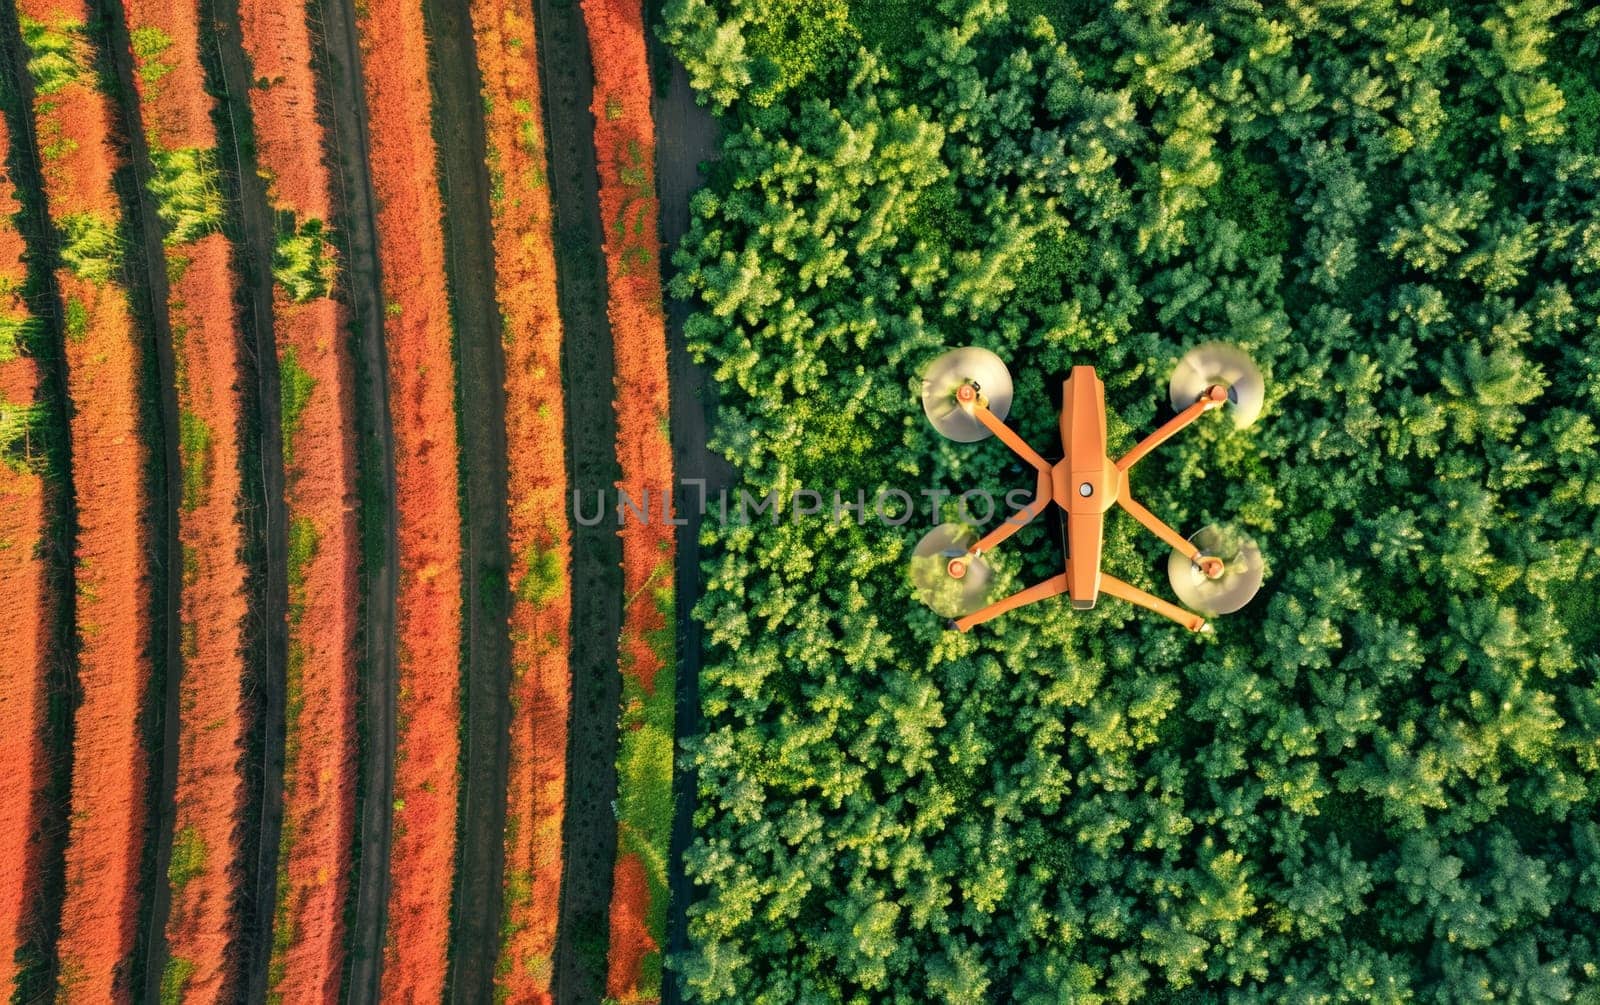 From above, a drone hovers over the contrasting rows of a lush green forest, the technology of man overseeing the wild patterns of nature. View offers a fresh perspective on forestry and surveillance